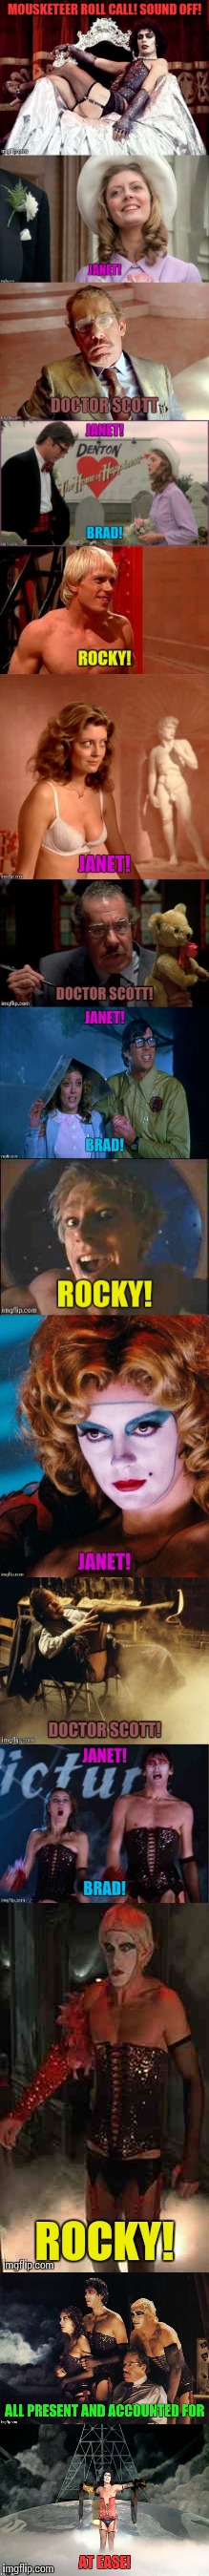 Rocky Horror Picture Show | image tagged in rocky horror,rocky horror picture show,nsfw,movie,funny memes,collage | made w/ Imgflip meme maker